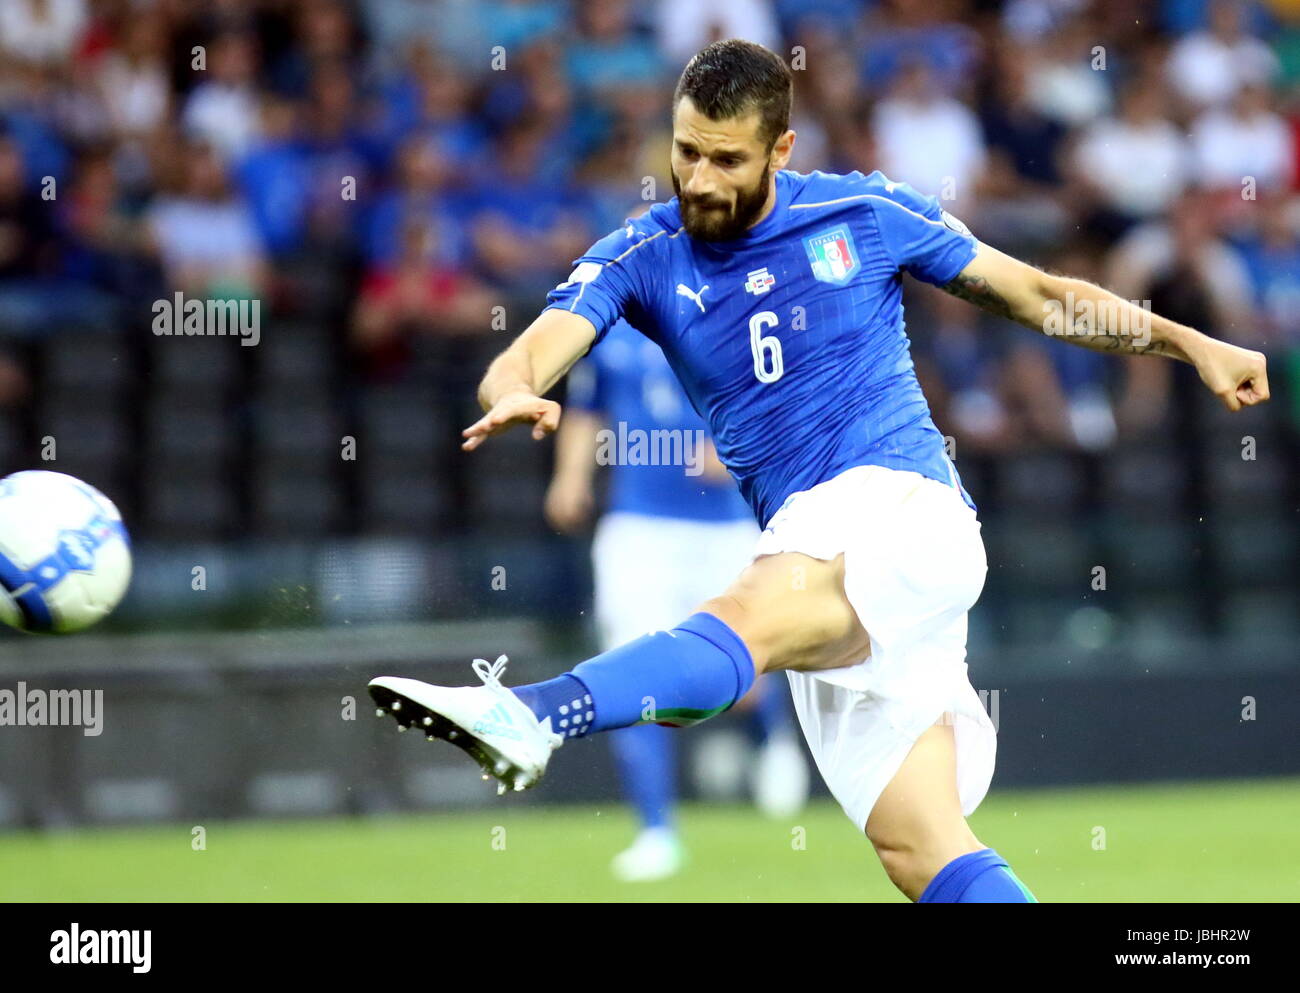 Udine, Friuli Venezia Giulia. 11th June, 2017. ITALY, Udine: Italy's midfielder Antonio Candreva kicks the ball during of the FIFA World Cup 2018 qualification football match between Italy and Liechtenstein at Dacia Arena Stadium on 11th June, 2017. Credit: Andrea Spinelli/Alamy Live News Stock Photo